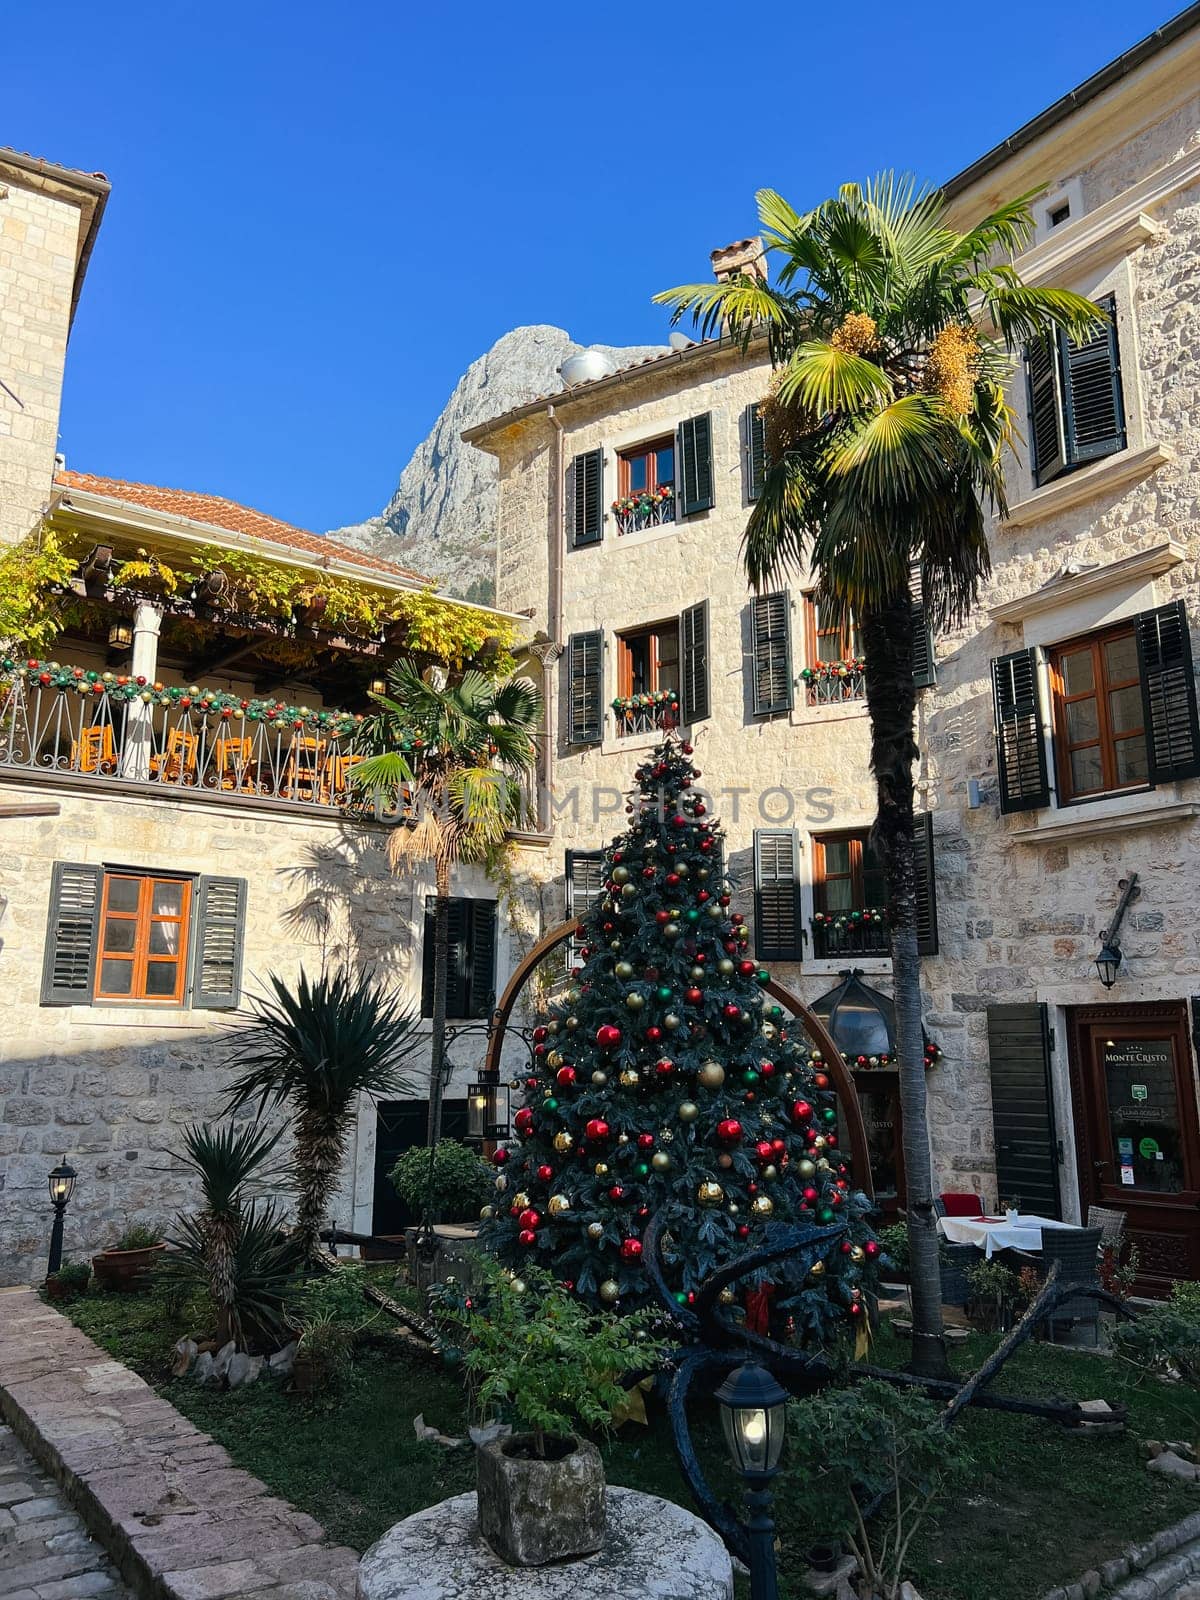 Kotor, Montenegro - 25 december 2022: Decorated Christmas tree in the courtyard of an old stone house among palm trees by Nadtochiy